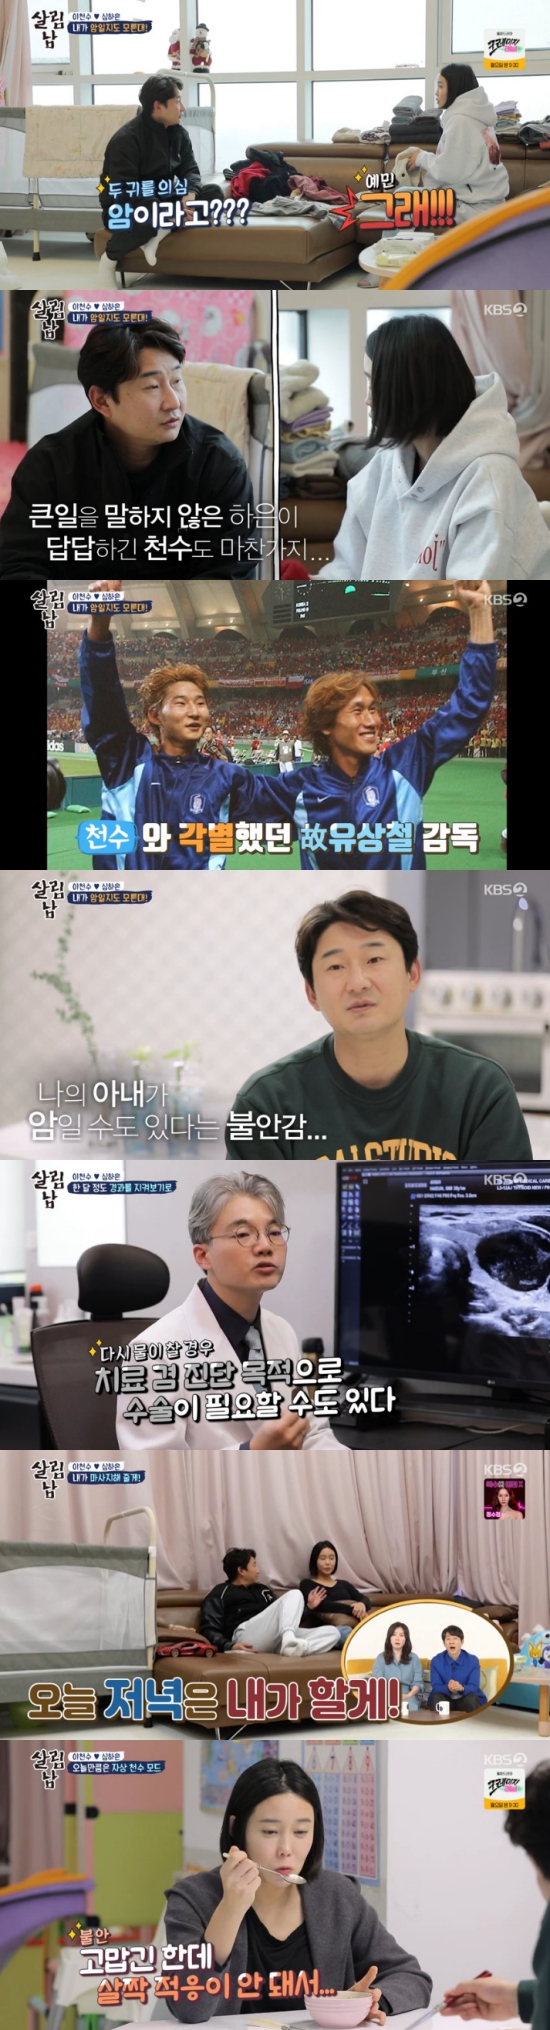 ( ) Former footballer Lee Chun-soo was worried about the health of model Shim Ha-eun.On KBS 2TV Saving Men Season 2 broadcast on the 12th, Shim Ha-eun received a biopsy.On the day, Shim Ha-eun called Shim Ha-eun Mother and said, I had a comprehensive health check last month. I heard there was a lump in my neck. On the thyroid.Shim Ha-eun Mother asked, What did you say to this West? Shim Ha-eun said, I did not talk. I think Im very busy.Shim Ha-eun Mother said: Then Im sure my mom went up, you have to go to Hospital with your daughter (to Lee Chun-soo).Please call my mom later. Shim Ha-eun was tested at Hospital, and the doctor said: You cant tell if its 100% cancer or not, only by the naked eye.At the moment, it is necessary to keep in mind the possibility of maliciousness. The results will be confirmed in about a week. Shim Ha-eun blushed, and said, I think a mass that may be cancer is in my body, so Im a little creepy and I do something about the kids, and my state is starting a new semester of the new year.I can not take care of my dad. I was curious and I did not want to know on the other hand, and I was scared. Shim Ha-eun Mother also contacted Lee Chun-soo and said, Hi went to Hospital. He said he was sick. I went to Hospital and there was no phone.I spoke to Hospital. I am good in the West, but please call me. Lee said, Dont worry. Ill go right away. Lee Chun-soo immediately headed for The Way Home and mentioned that Shim Ha-eun Mother had called. Lee Chun-soo said, I do not think you can do it. Why did you go?You asked me what my schedule was. Im sick. Im not talking about you like you cant.I am sad for my position, he said.Lee Chun-soo said, I should know that Wife is sick. What is the story that I can not tell? Shim Ha-eun said, I do not do it.I tried to talk, but I was busy and busy, and I had to be able to talk about it late. Eventually, Shim Ha-eun said, My neck hurts. I have a lump in my neck. Ive been biopsy. Ive had a comprehensive checkup.Its a big size, so you have to do a biopsy. What about a biopsy. Lets see if its cancer or not. Lee said, Cancer? What cancer. I did not know. If I knew, would I? I did not know because I lost a lot of weight and had good color.Lee Chun-soo told the production team, When I told you about cancer, I thought, Its going to be a big deal. The person who accompanied me died of cancer.I was next to him at the time. There is a sensitive part about cancer. Lee then visited Hospital with Shim Ha-eun, and the doctor said, I did not see cancer cells once.However, if you check the water again in about a month or so, and if you see water at a rapid rate or a lump, you may need surgery for surgical removal and treatment and diagnosis. That evening, Lee gave a massage to Shim Ha-eun, There is a joy, it is a good result because we go together.I will do it this evening because I am tired. Lee made fried rice with eggs, and Shim Ha-eun confessed, I can not adapt to this like today. Thank you, but I am afraid of breaking at some point.Lee Chun-soo said, Tell me when you want to eat egg.Photo = KBS Broadcasting Screen